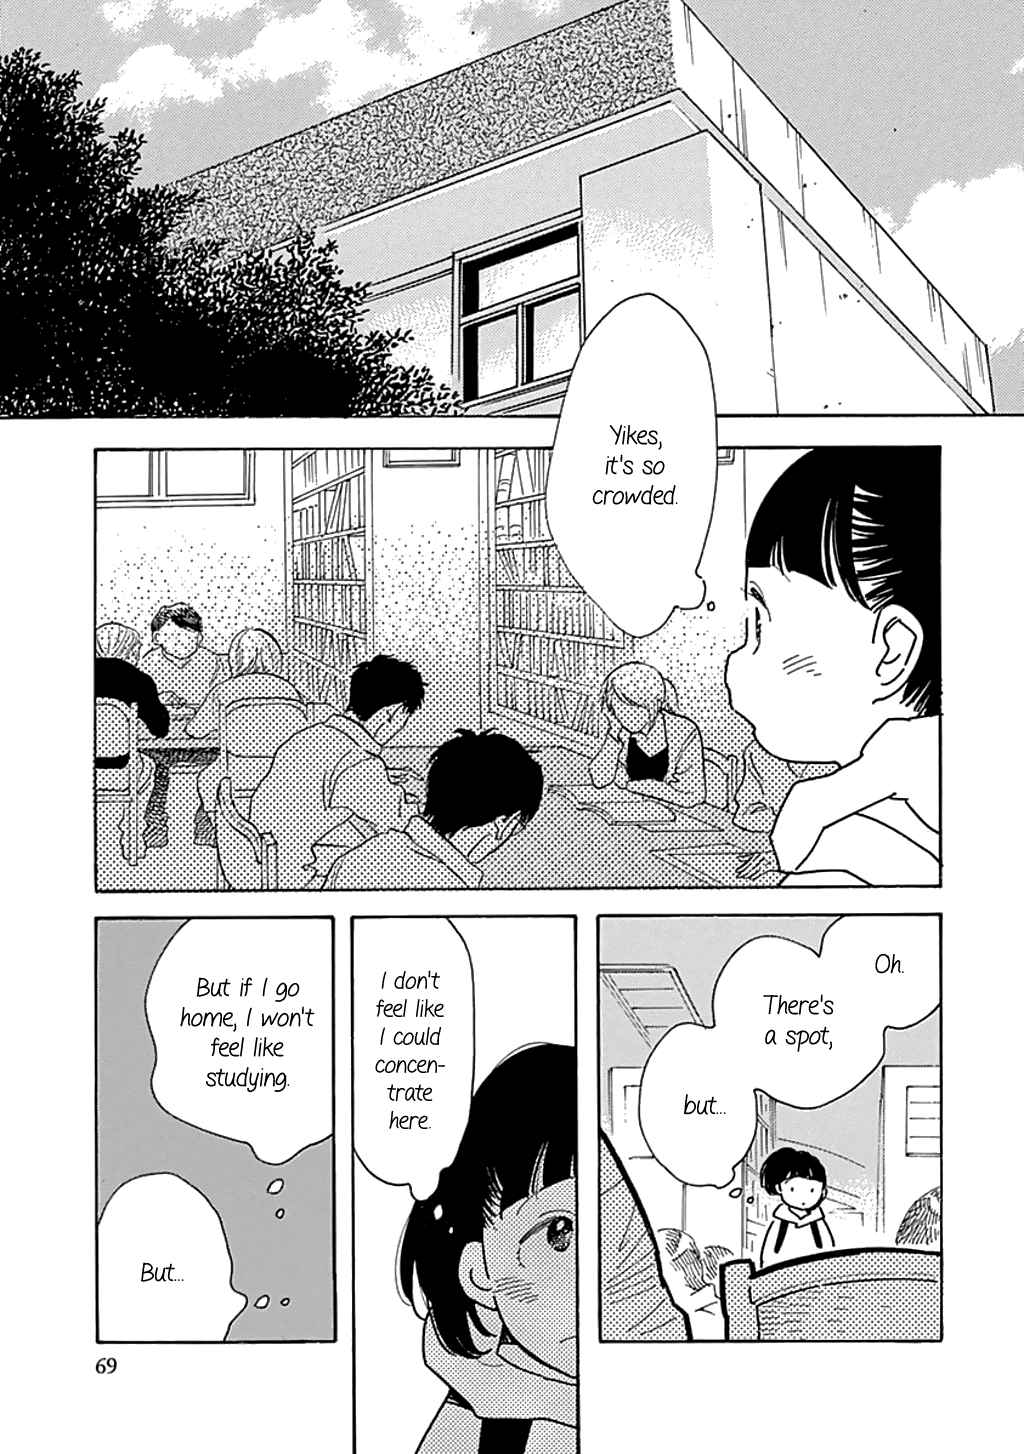 Musume no Iede Vol. 4 Ch. 21 Suddenly One Day